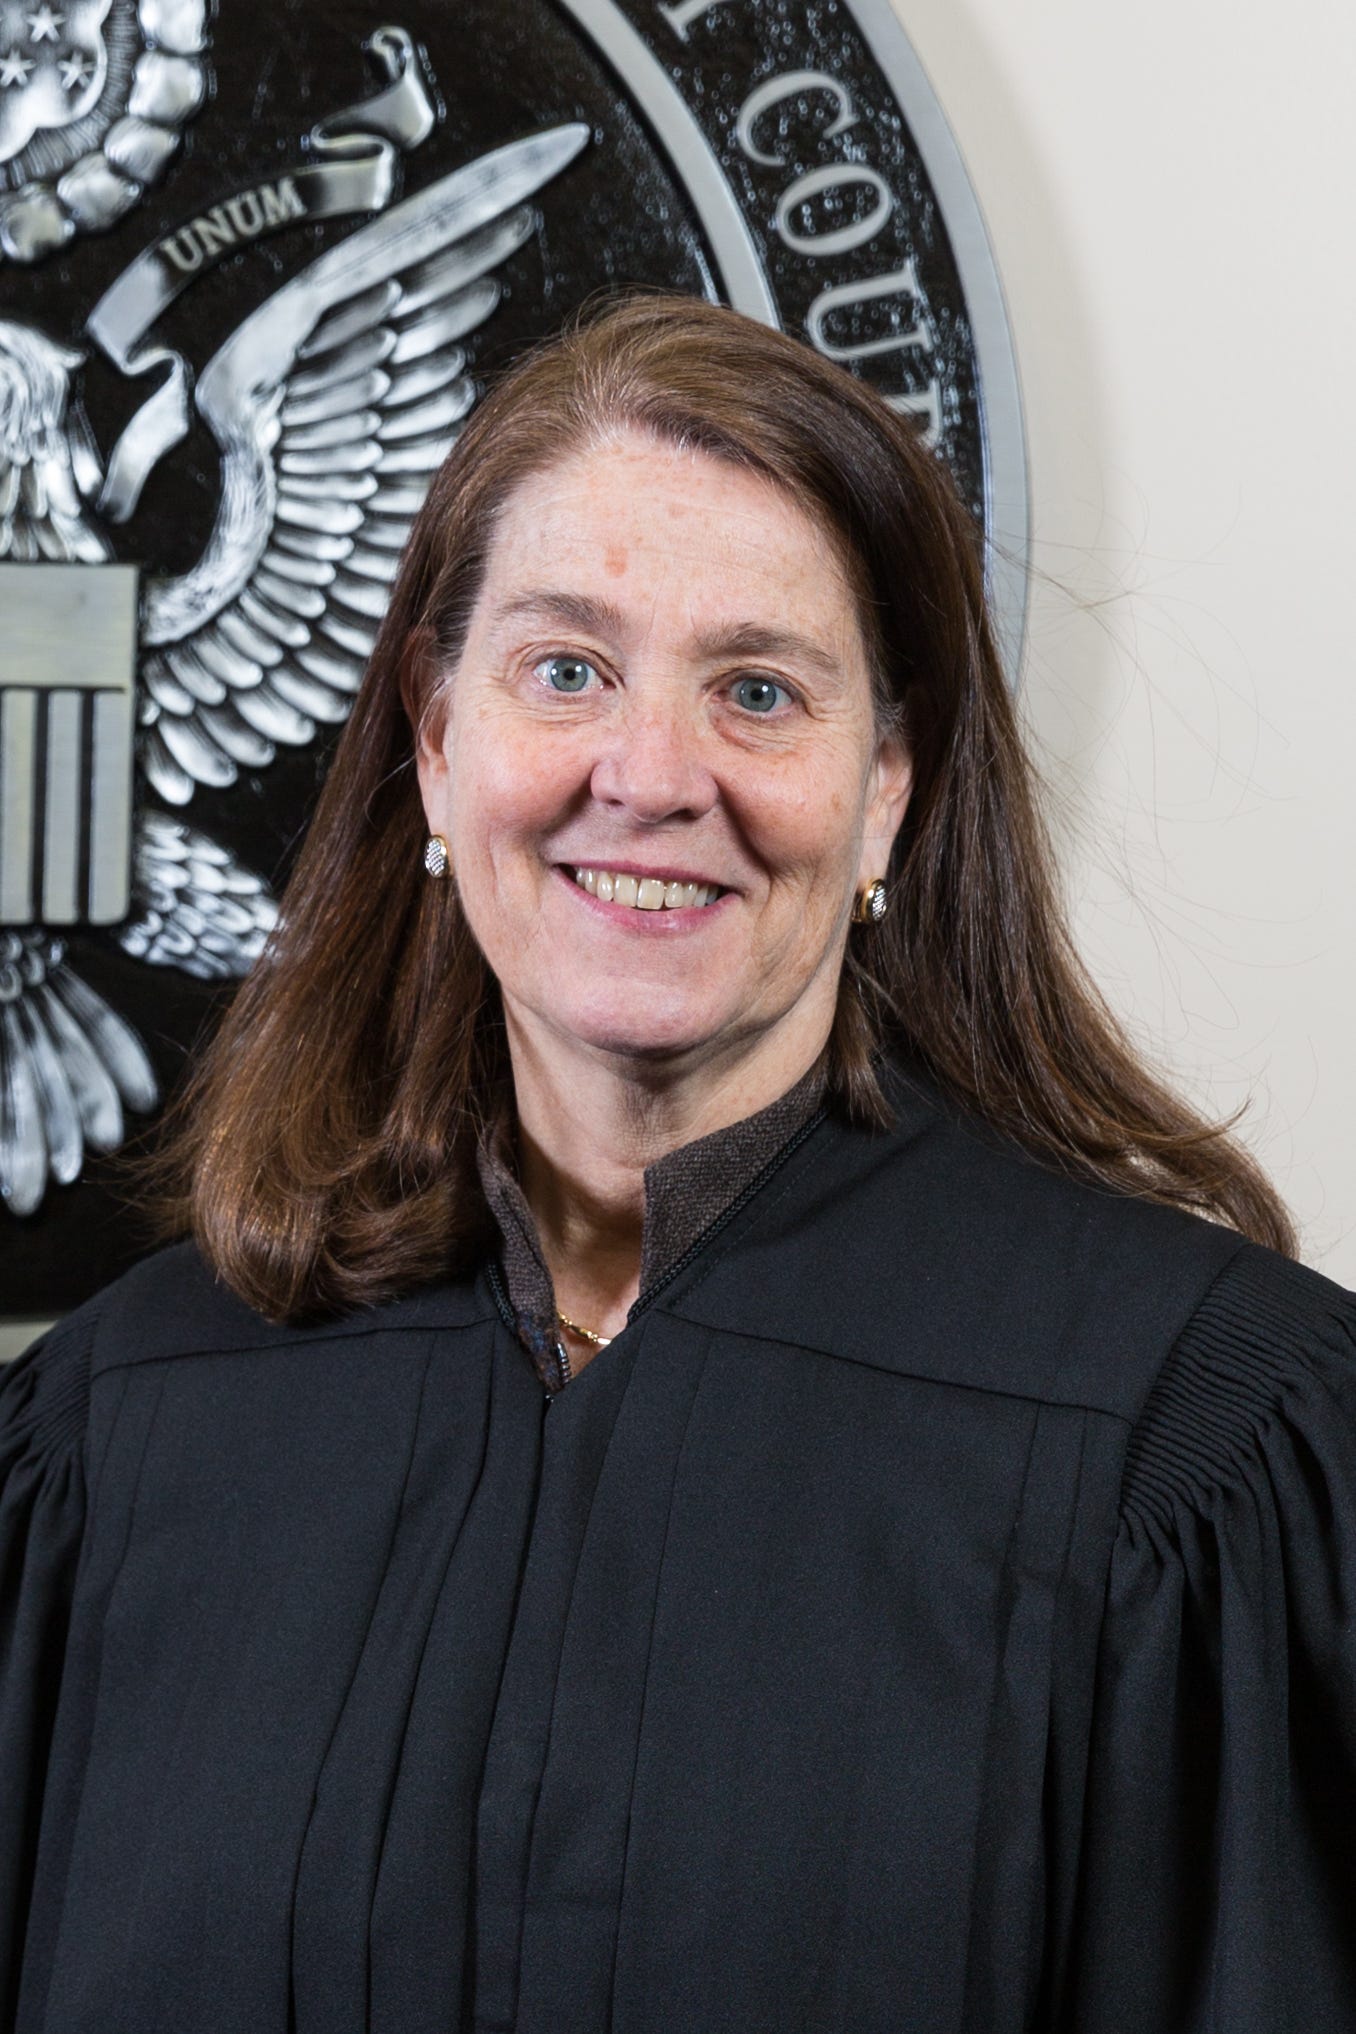 Judge Mary Kay Vyskocil, a Dominican College grad, named to federal bench